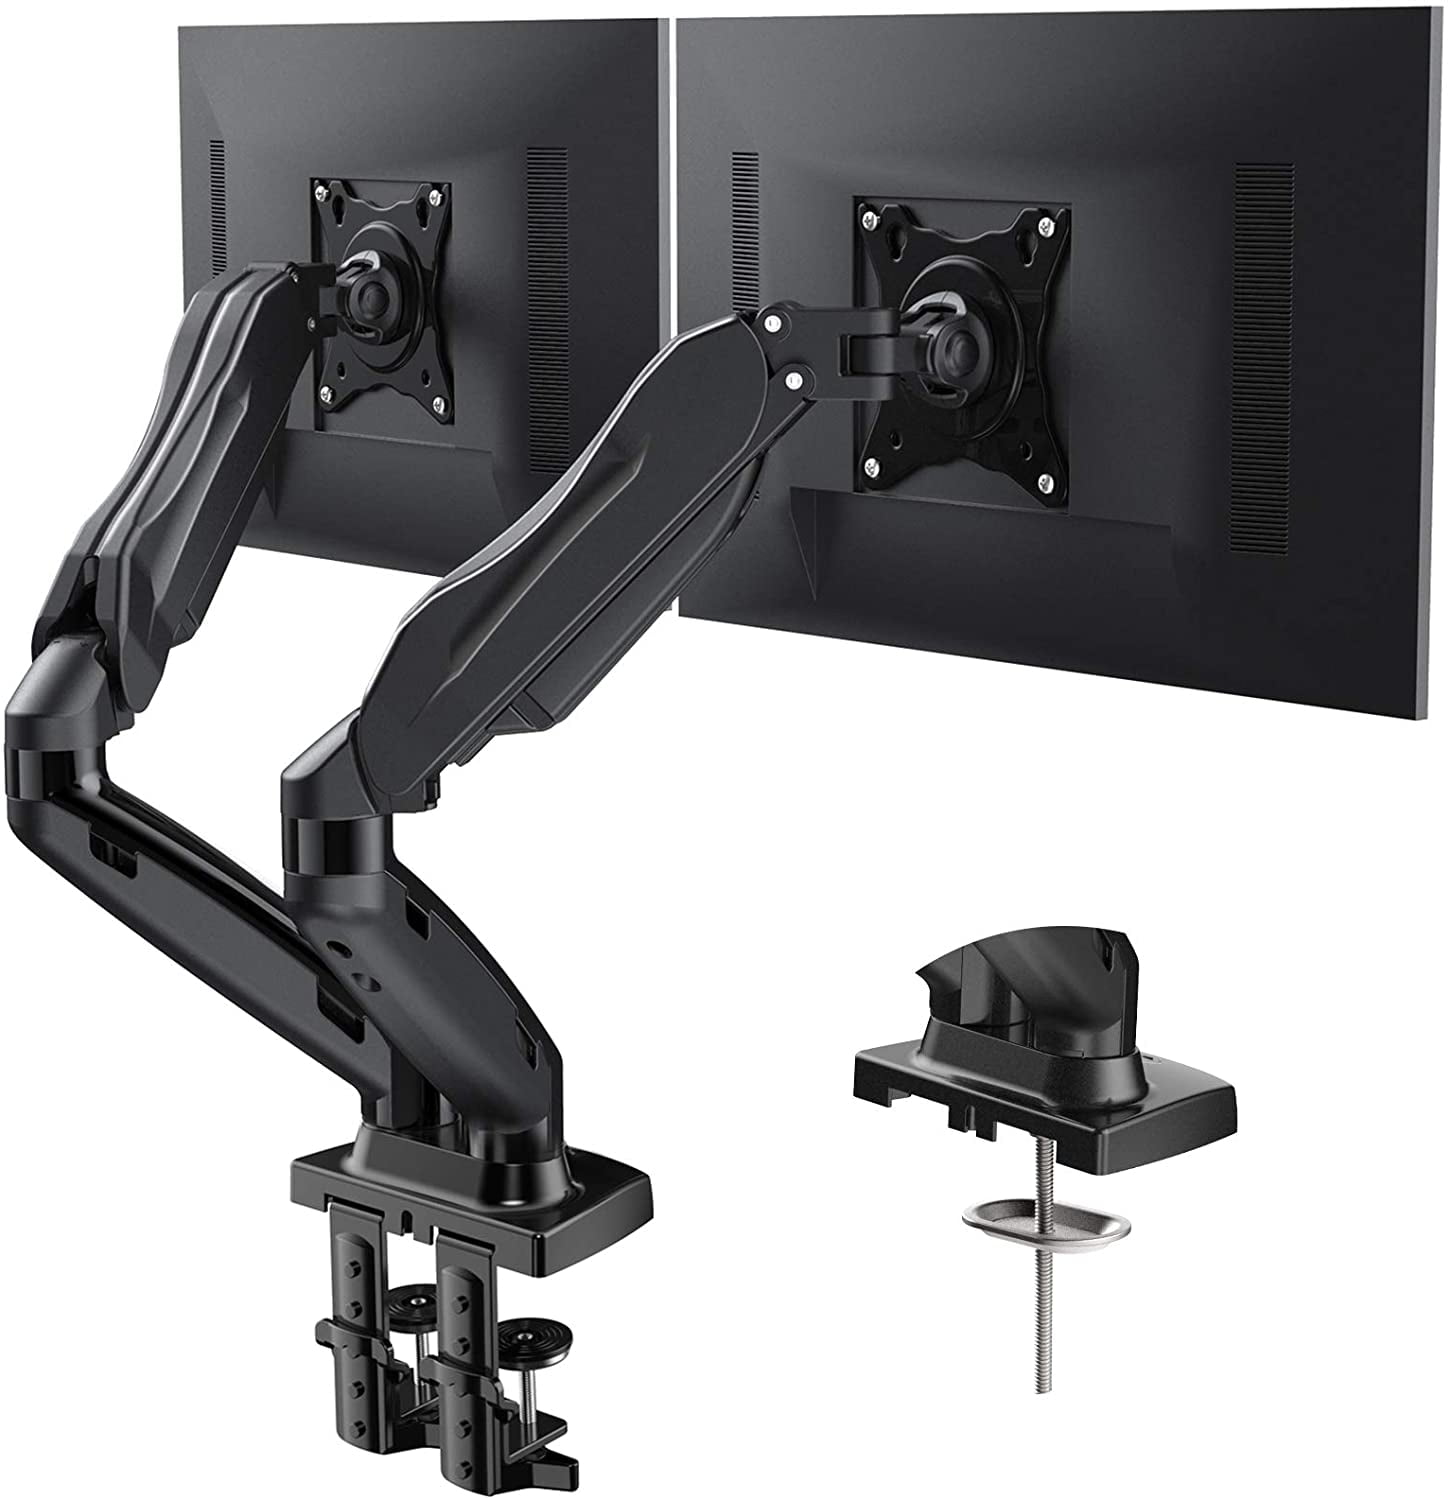 PEAL Free Standing Dual TV LCD Monitor Desk Mount Fit Two 2 Screens 27'' 33lbs 